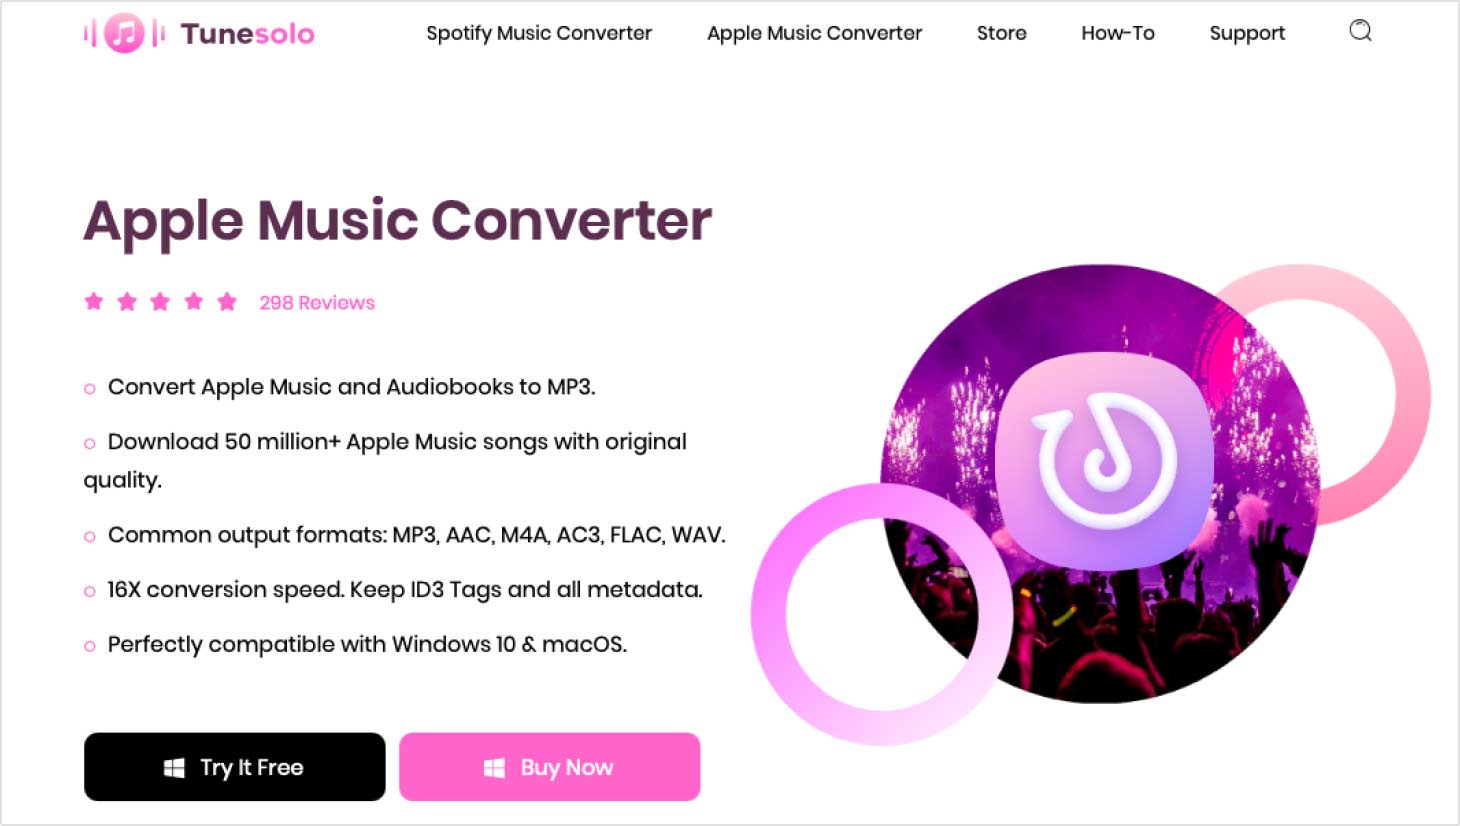 Main Features of TuneSolo Apple Music Converter